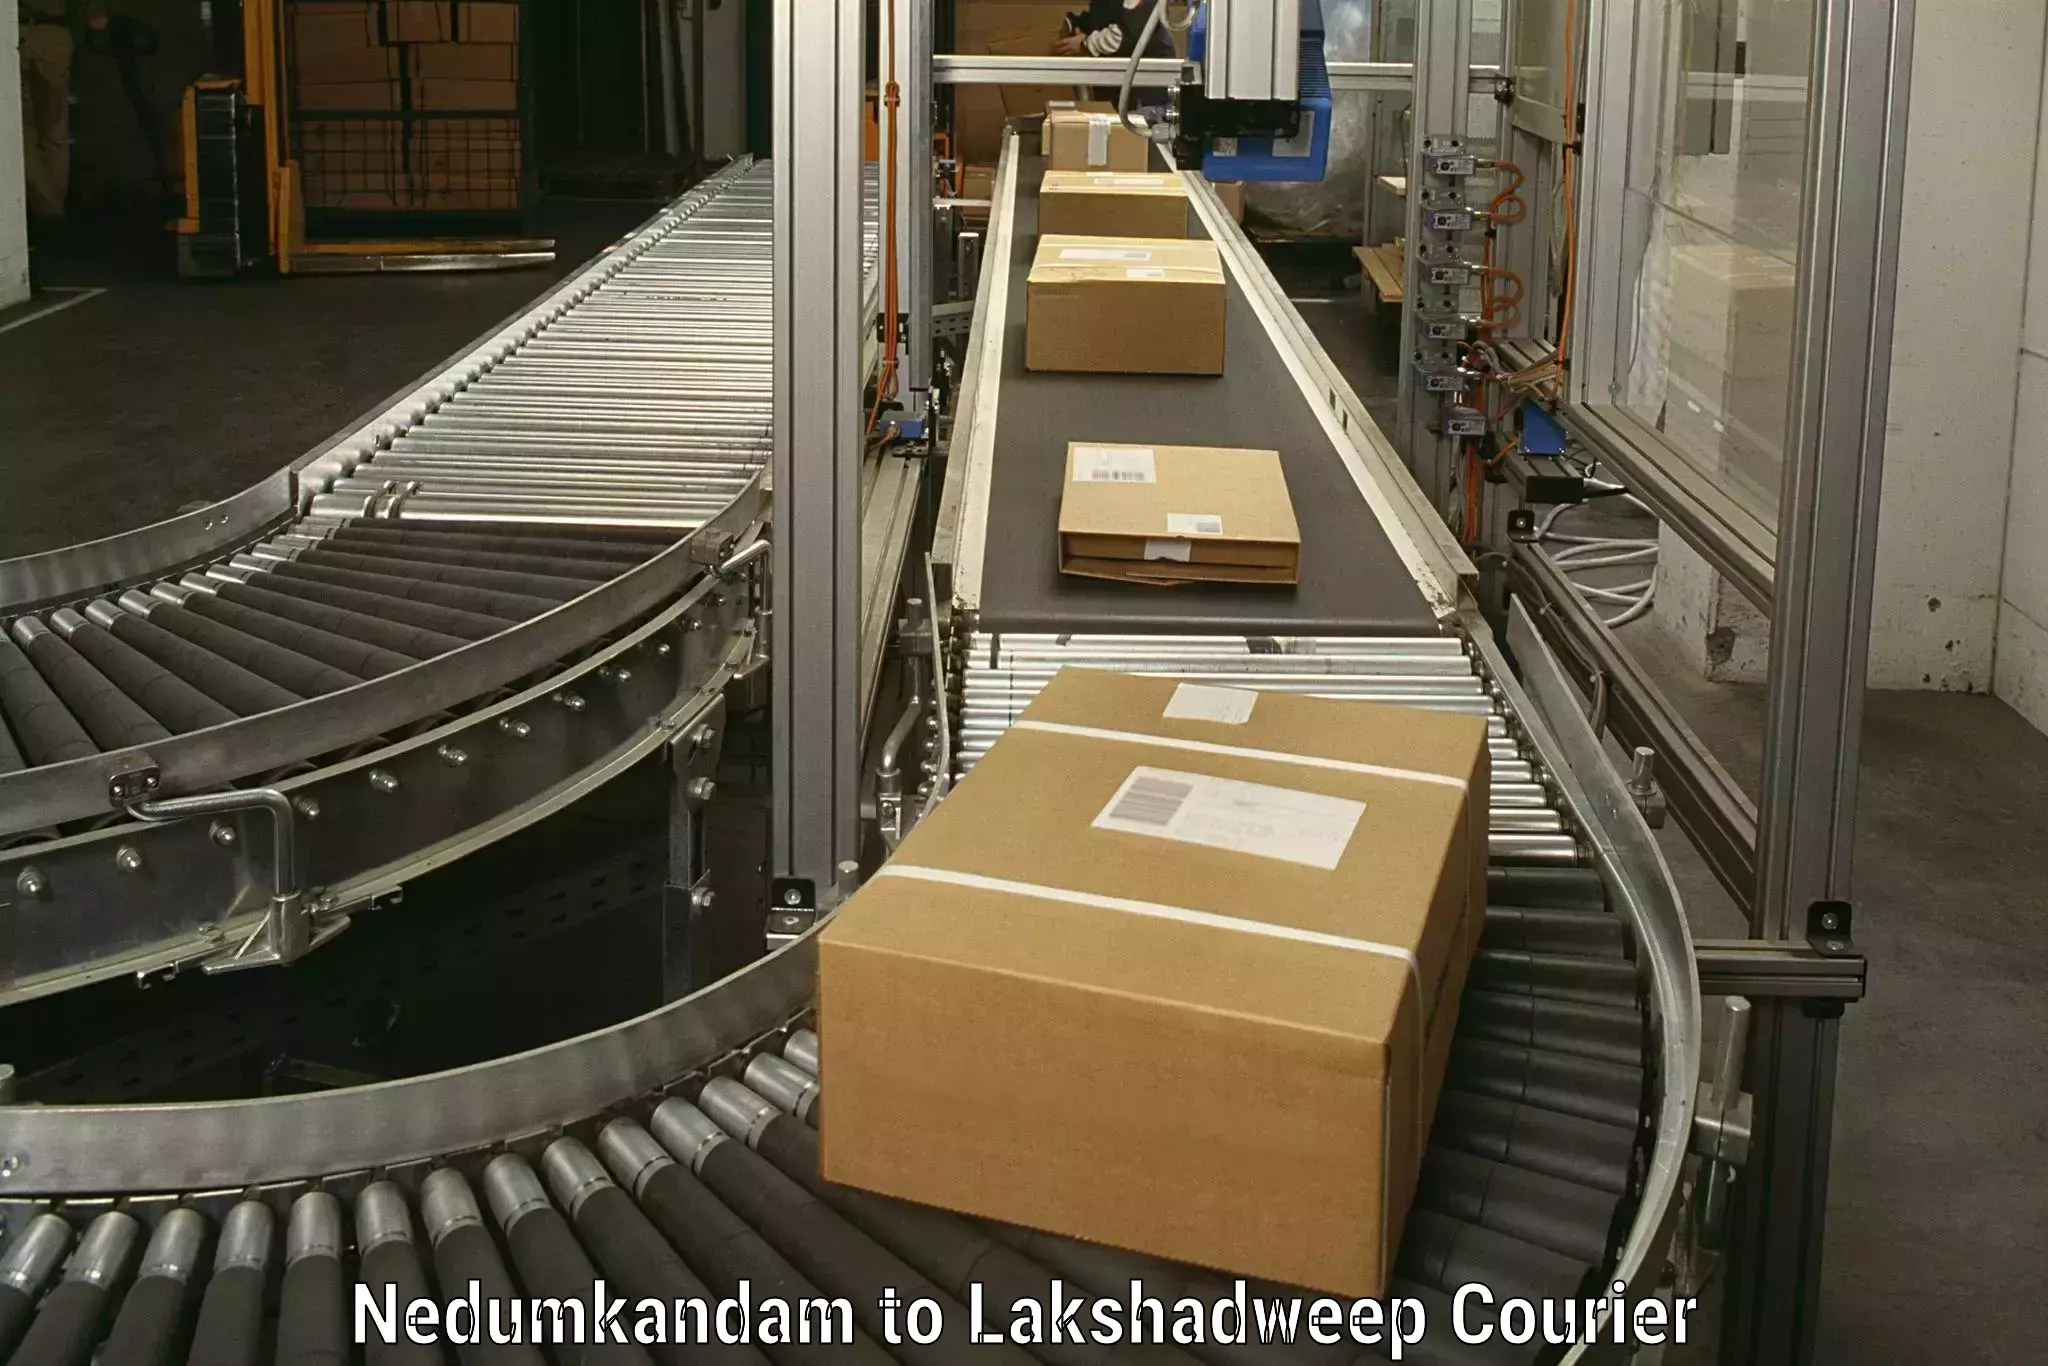 Quality moving services in Nedumkandam to Lakshadweep